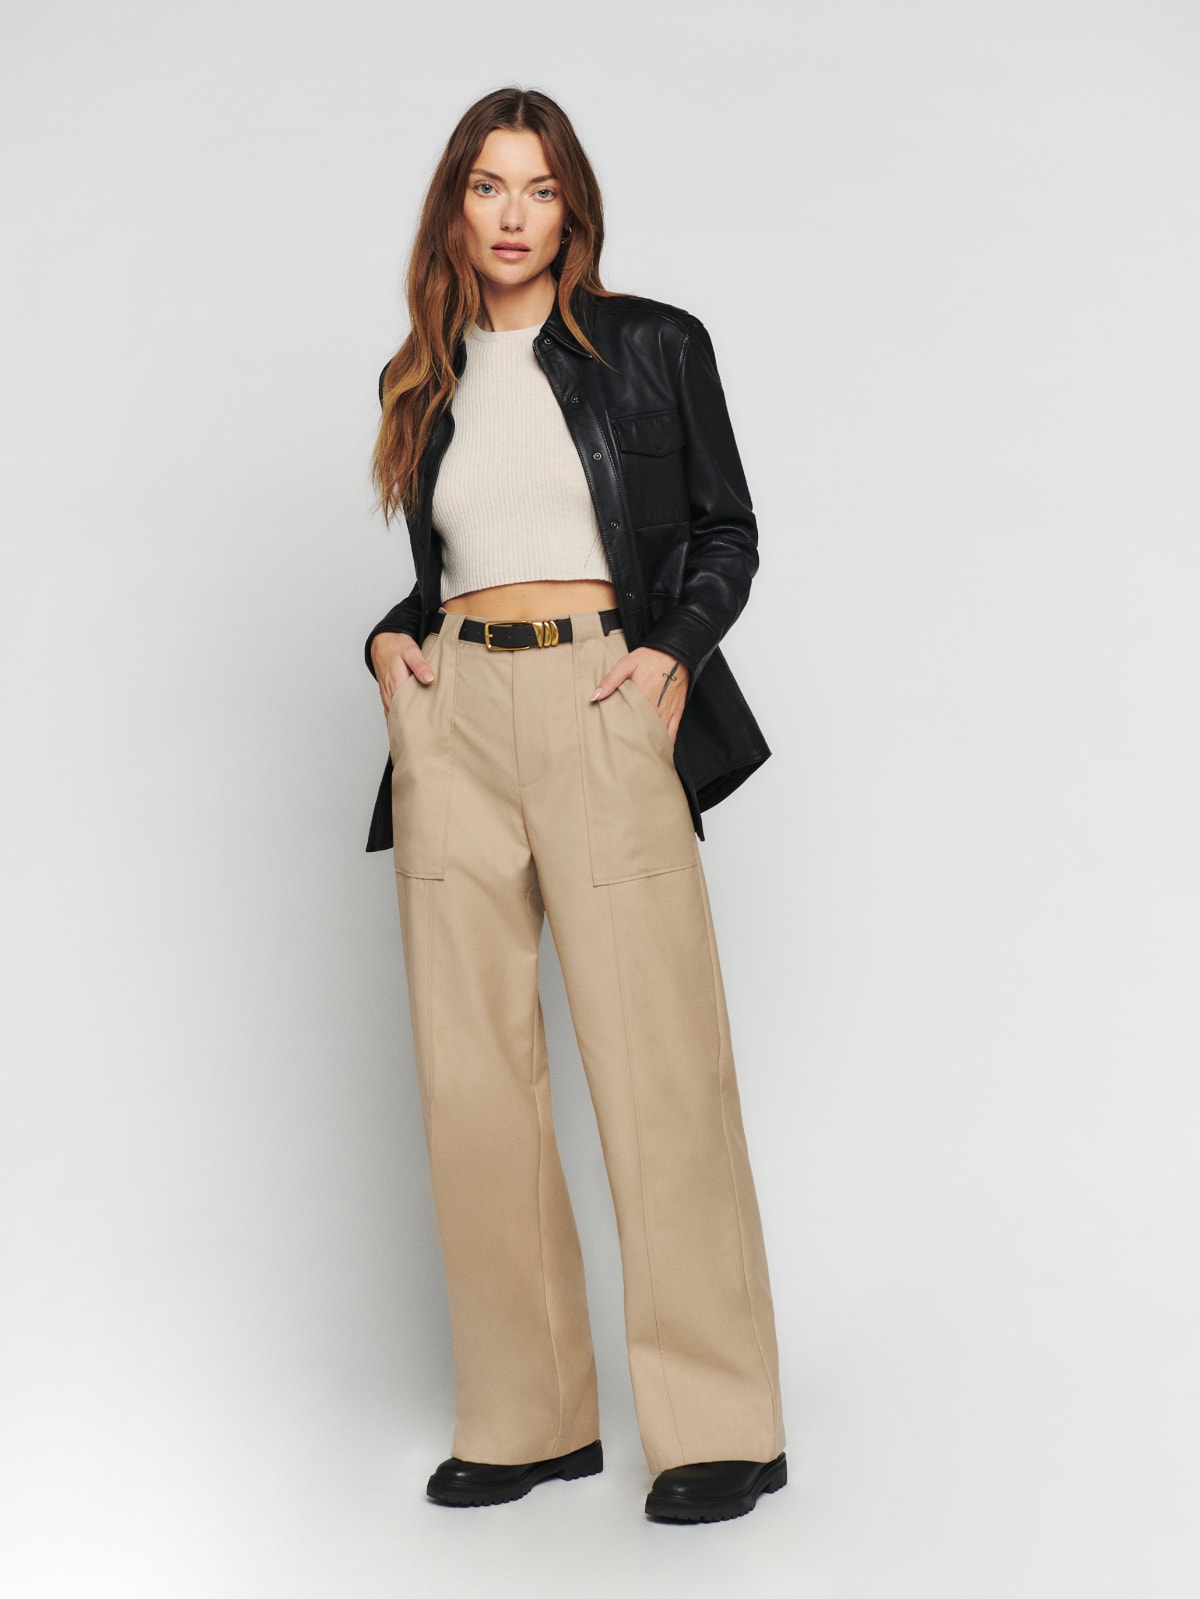 The Reformation Noah pant is a high-rise pant with slightly flared, wide legs and princess seams. It features belt loops, functional front pockets, and back pocket details.
